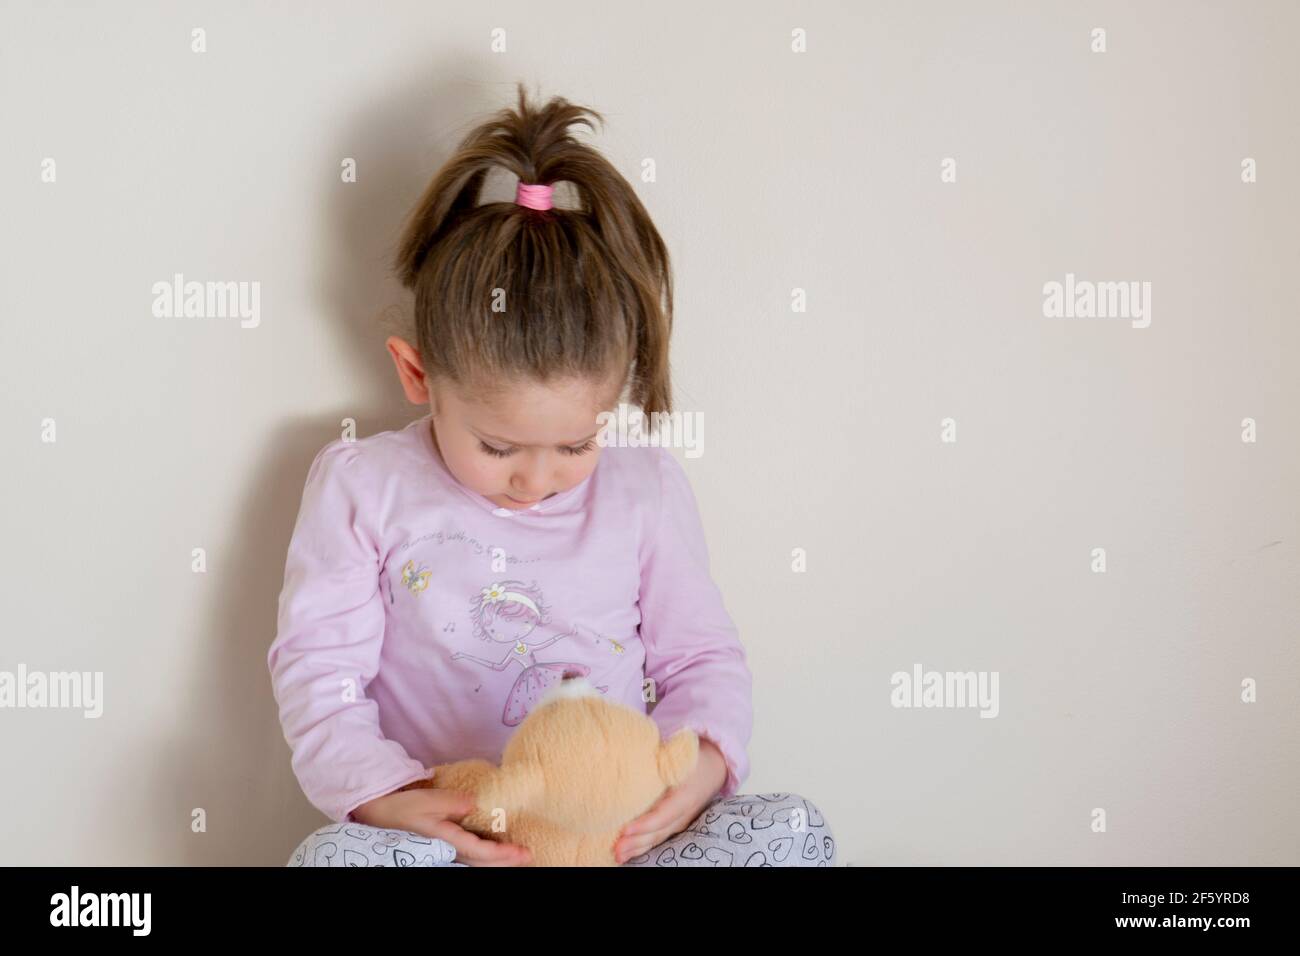 chubby little girl plays with her teddy bear while waiting for her pediatric examination. Selective Focus face Stock Photo